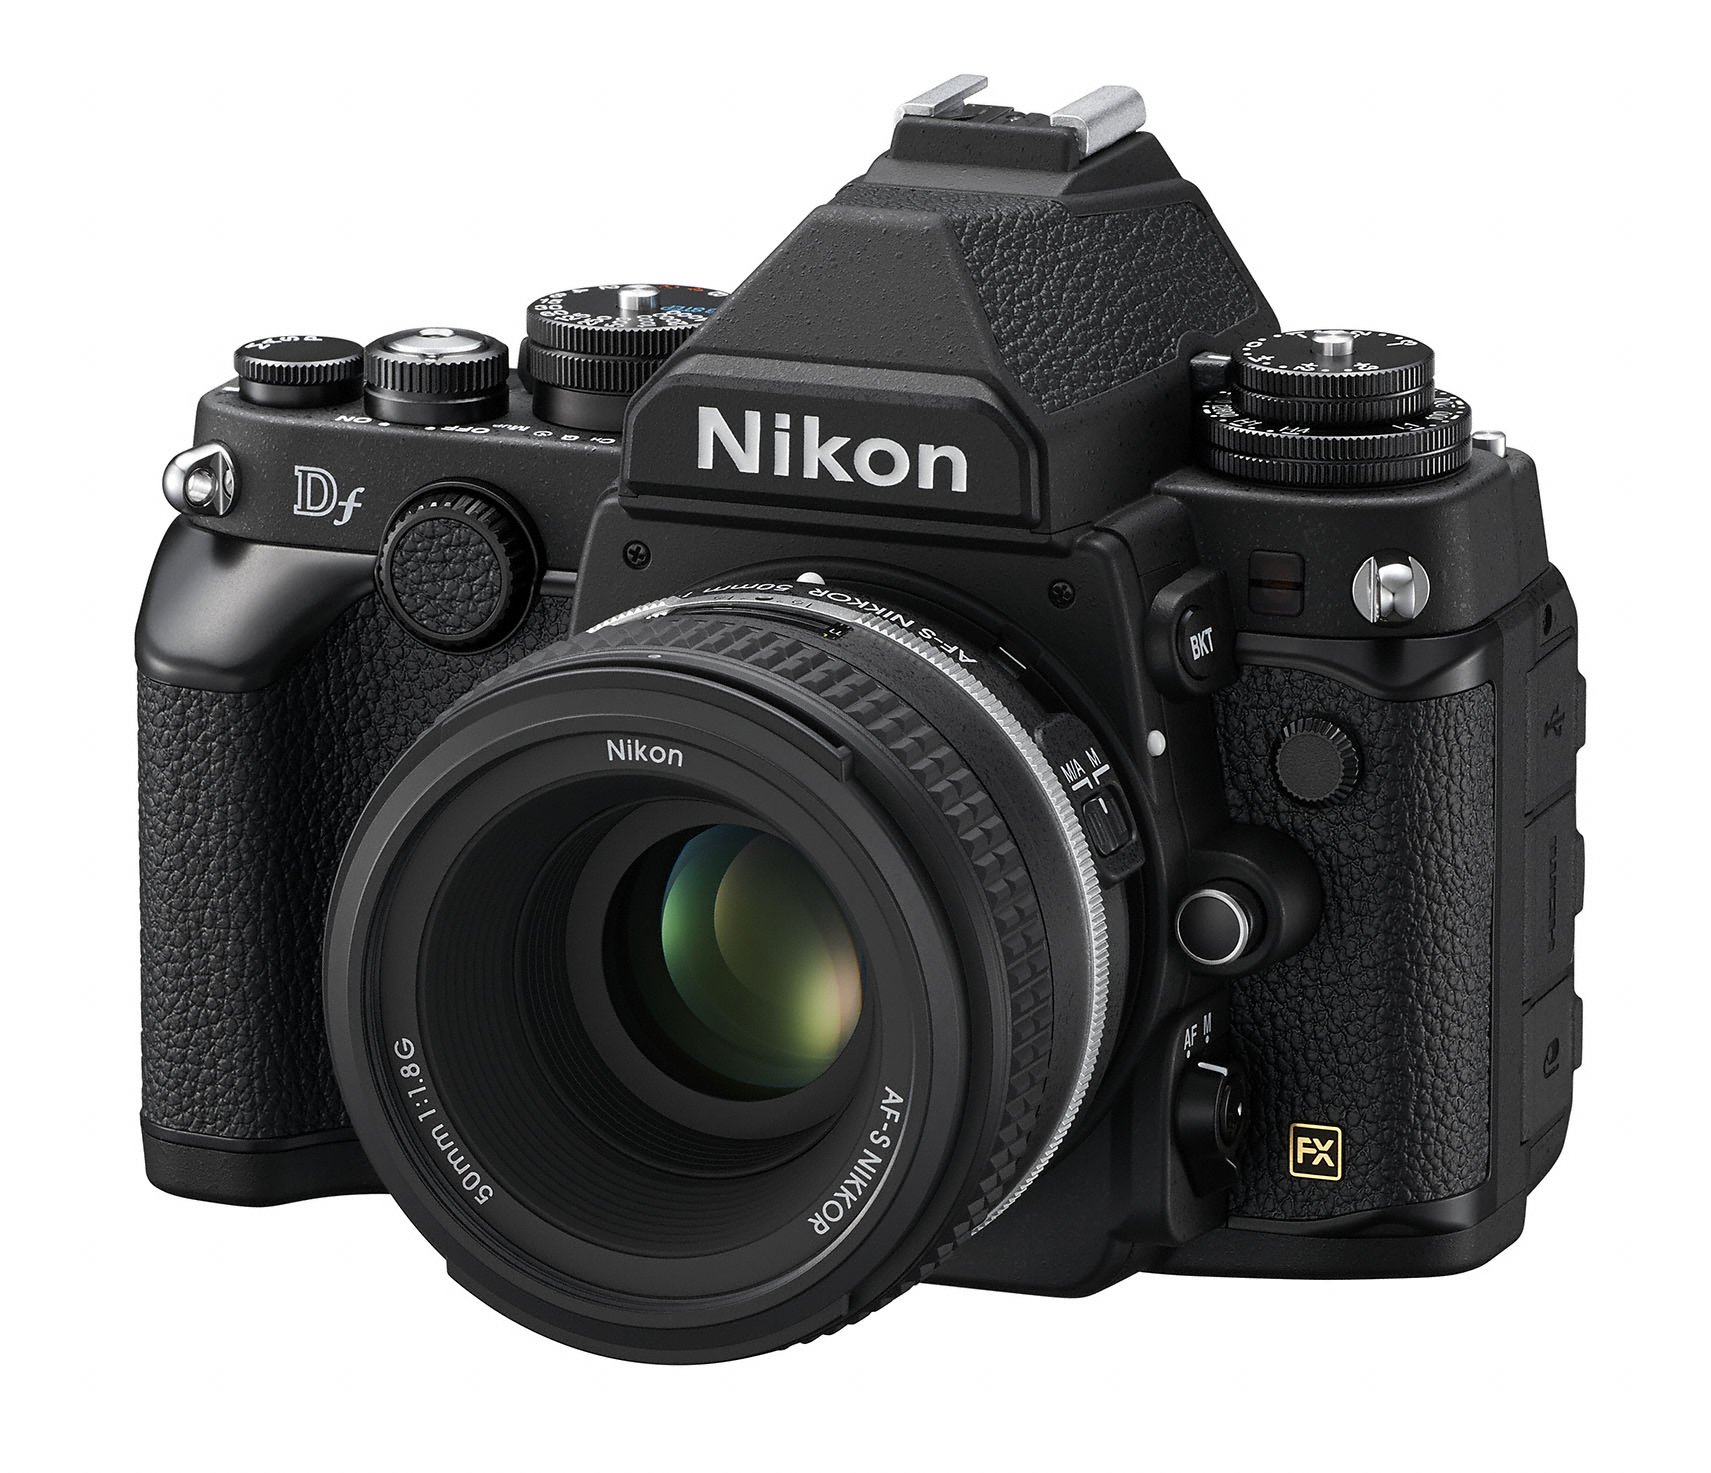 Nikon’s Highly Anticipated Df Camera Series and AF-S NIKKOR 50mm f/1.8G